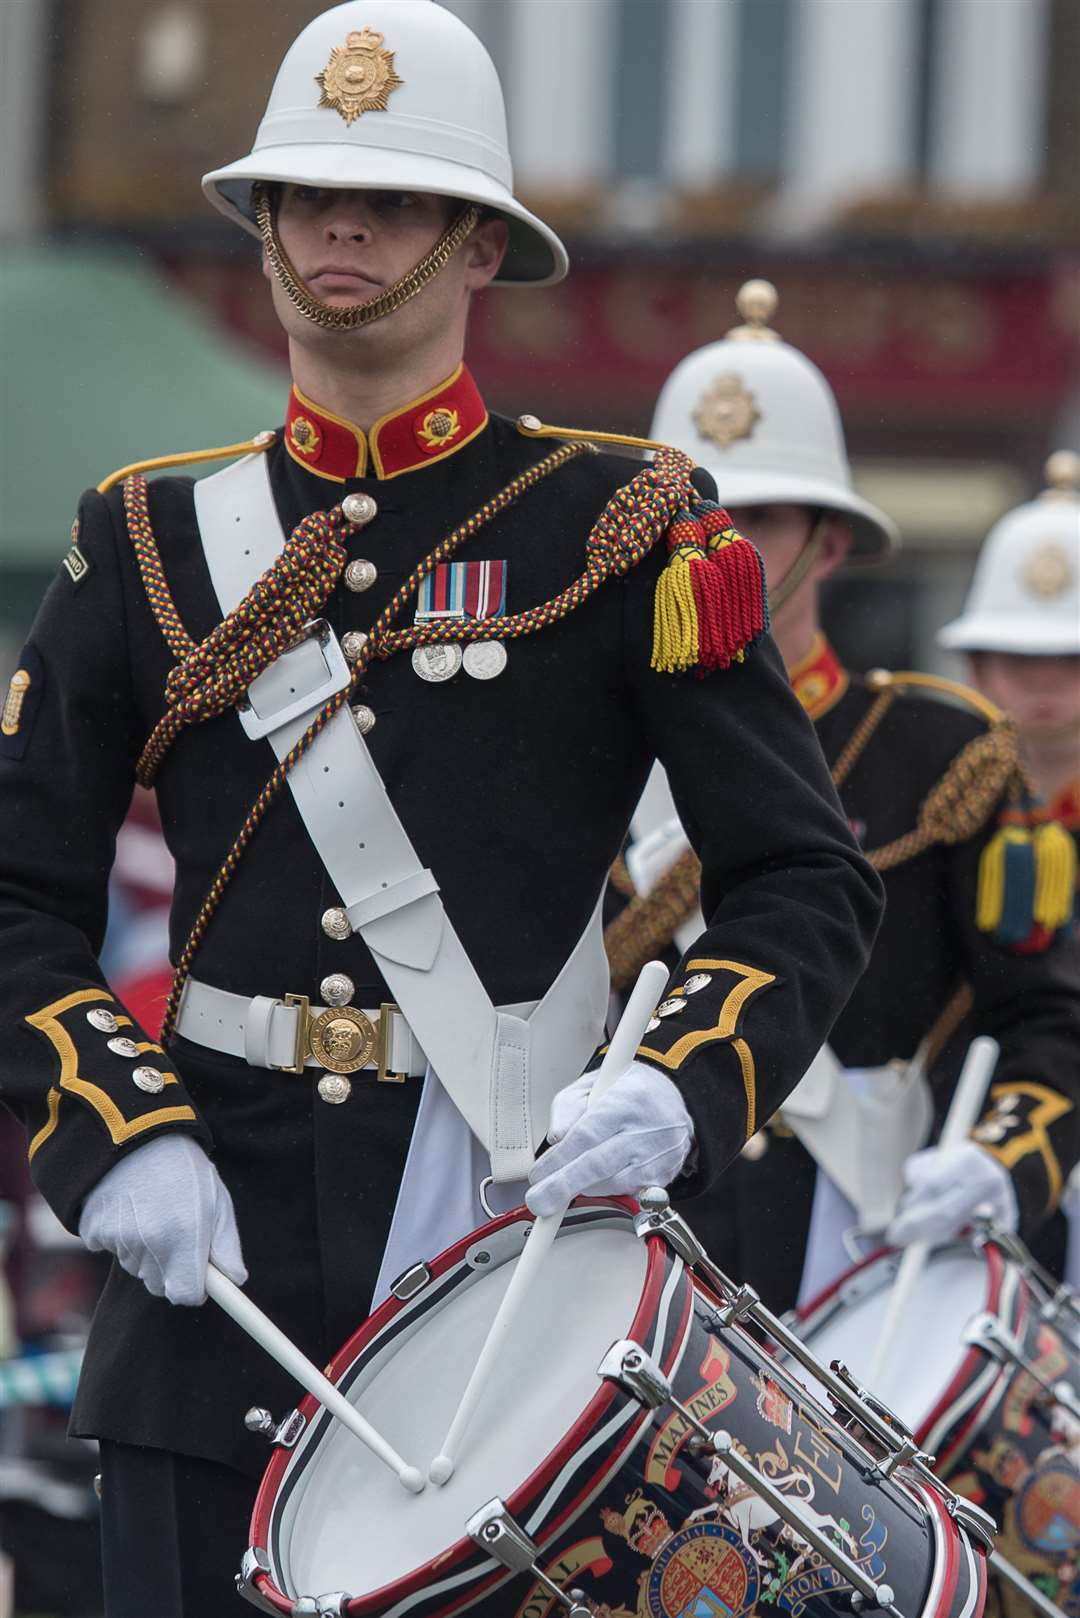 The Corps of Drums will welcome Royal Marine runners across the same finishing line